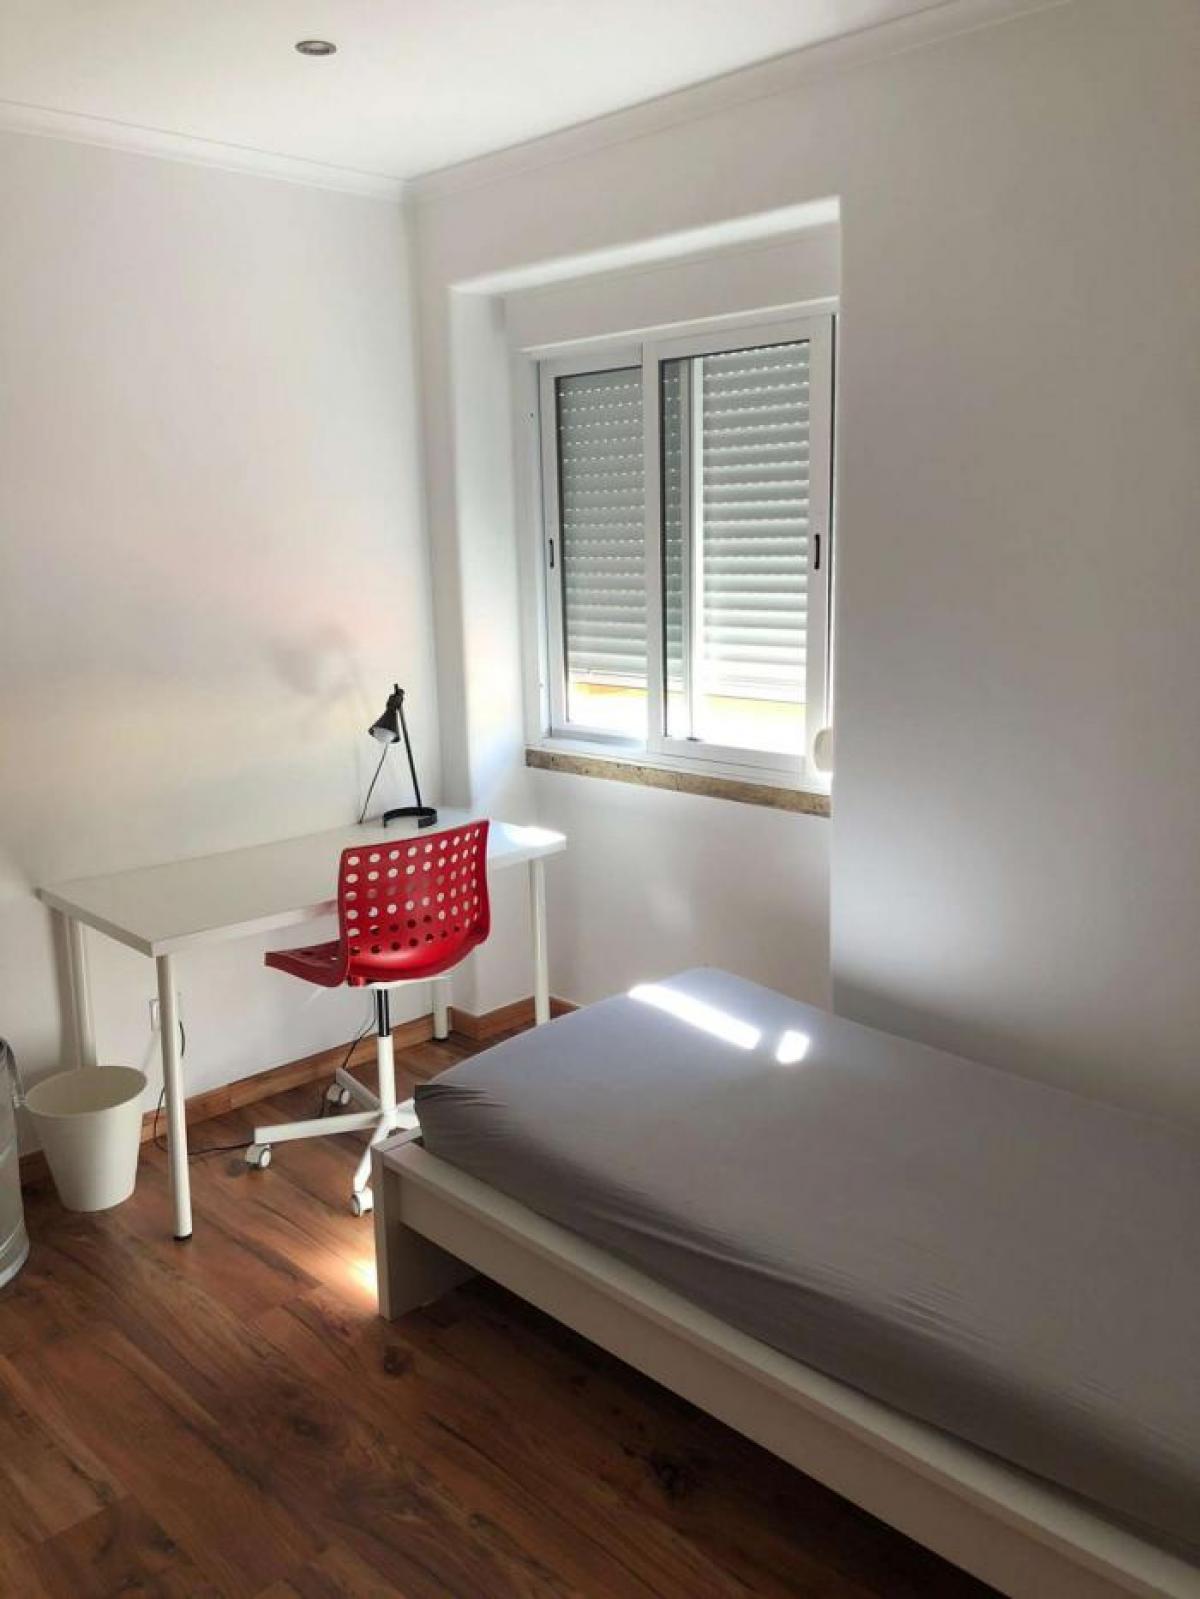 Picture of Apartment For Rent in Lisbon, Estremadura, Portugal